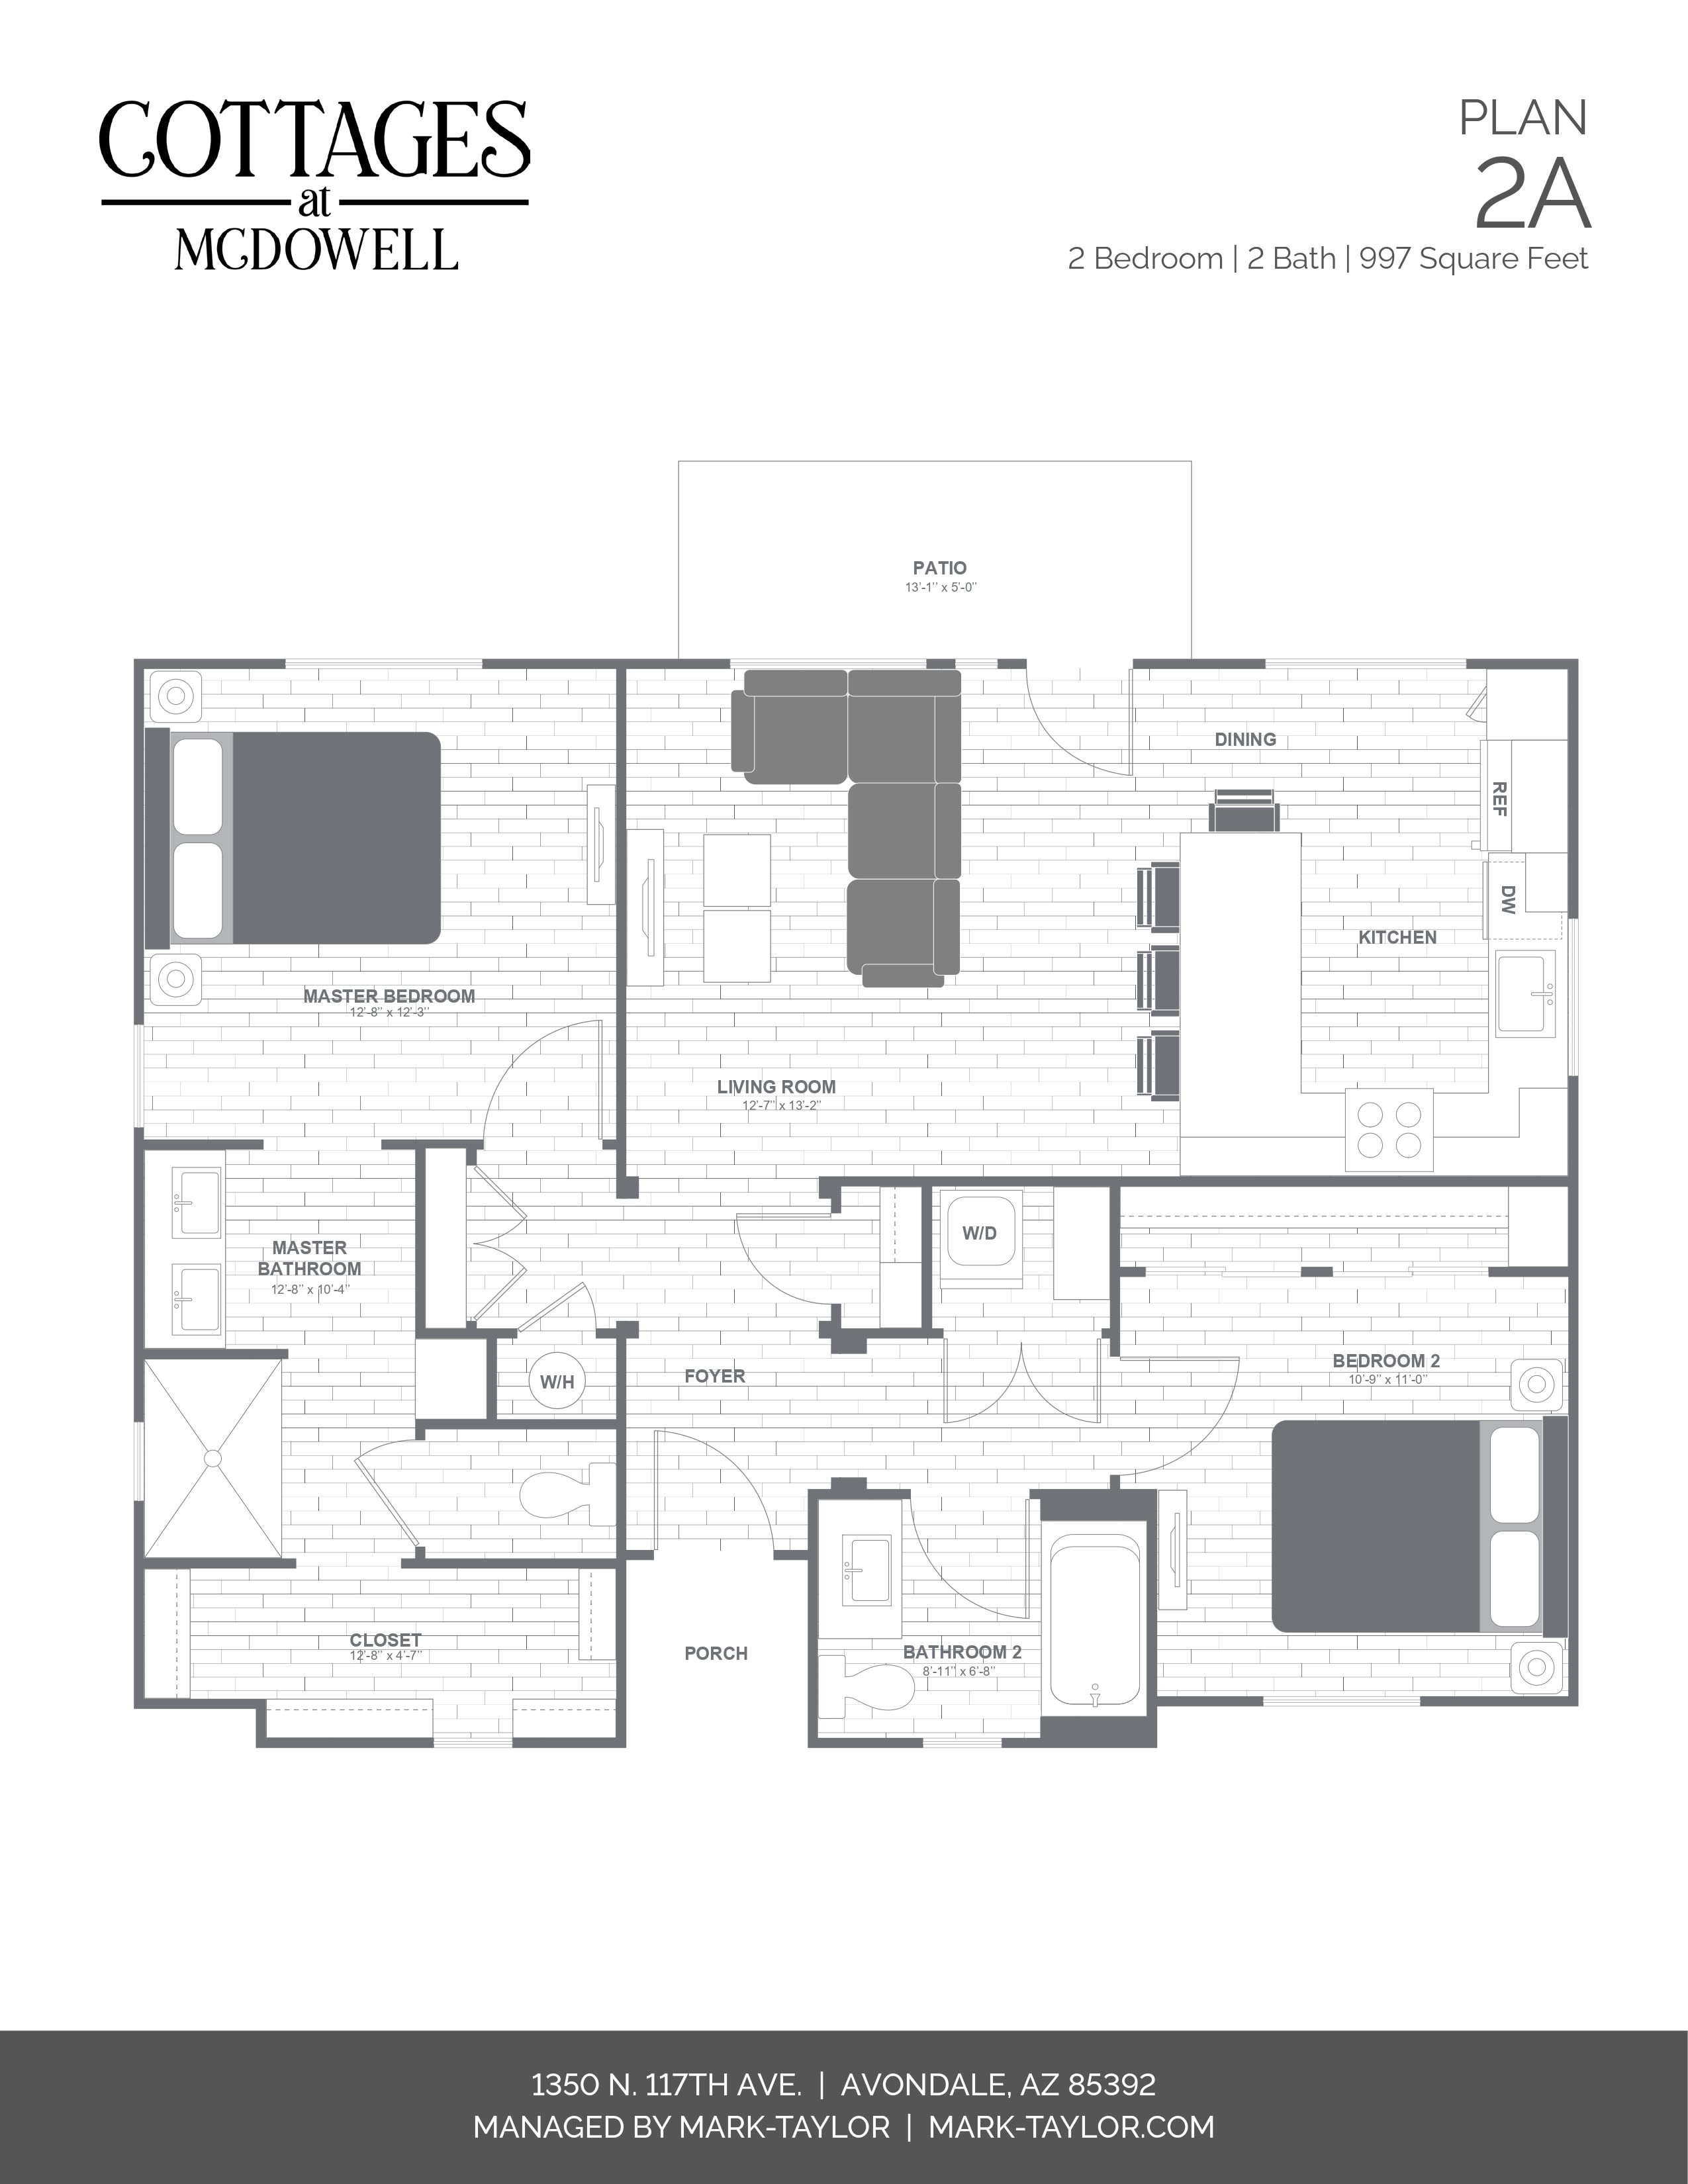 2D studio floor plan image at Cottages at McDowell in Avondale, Arizona